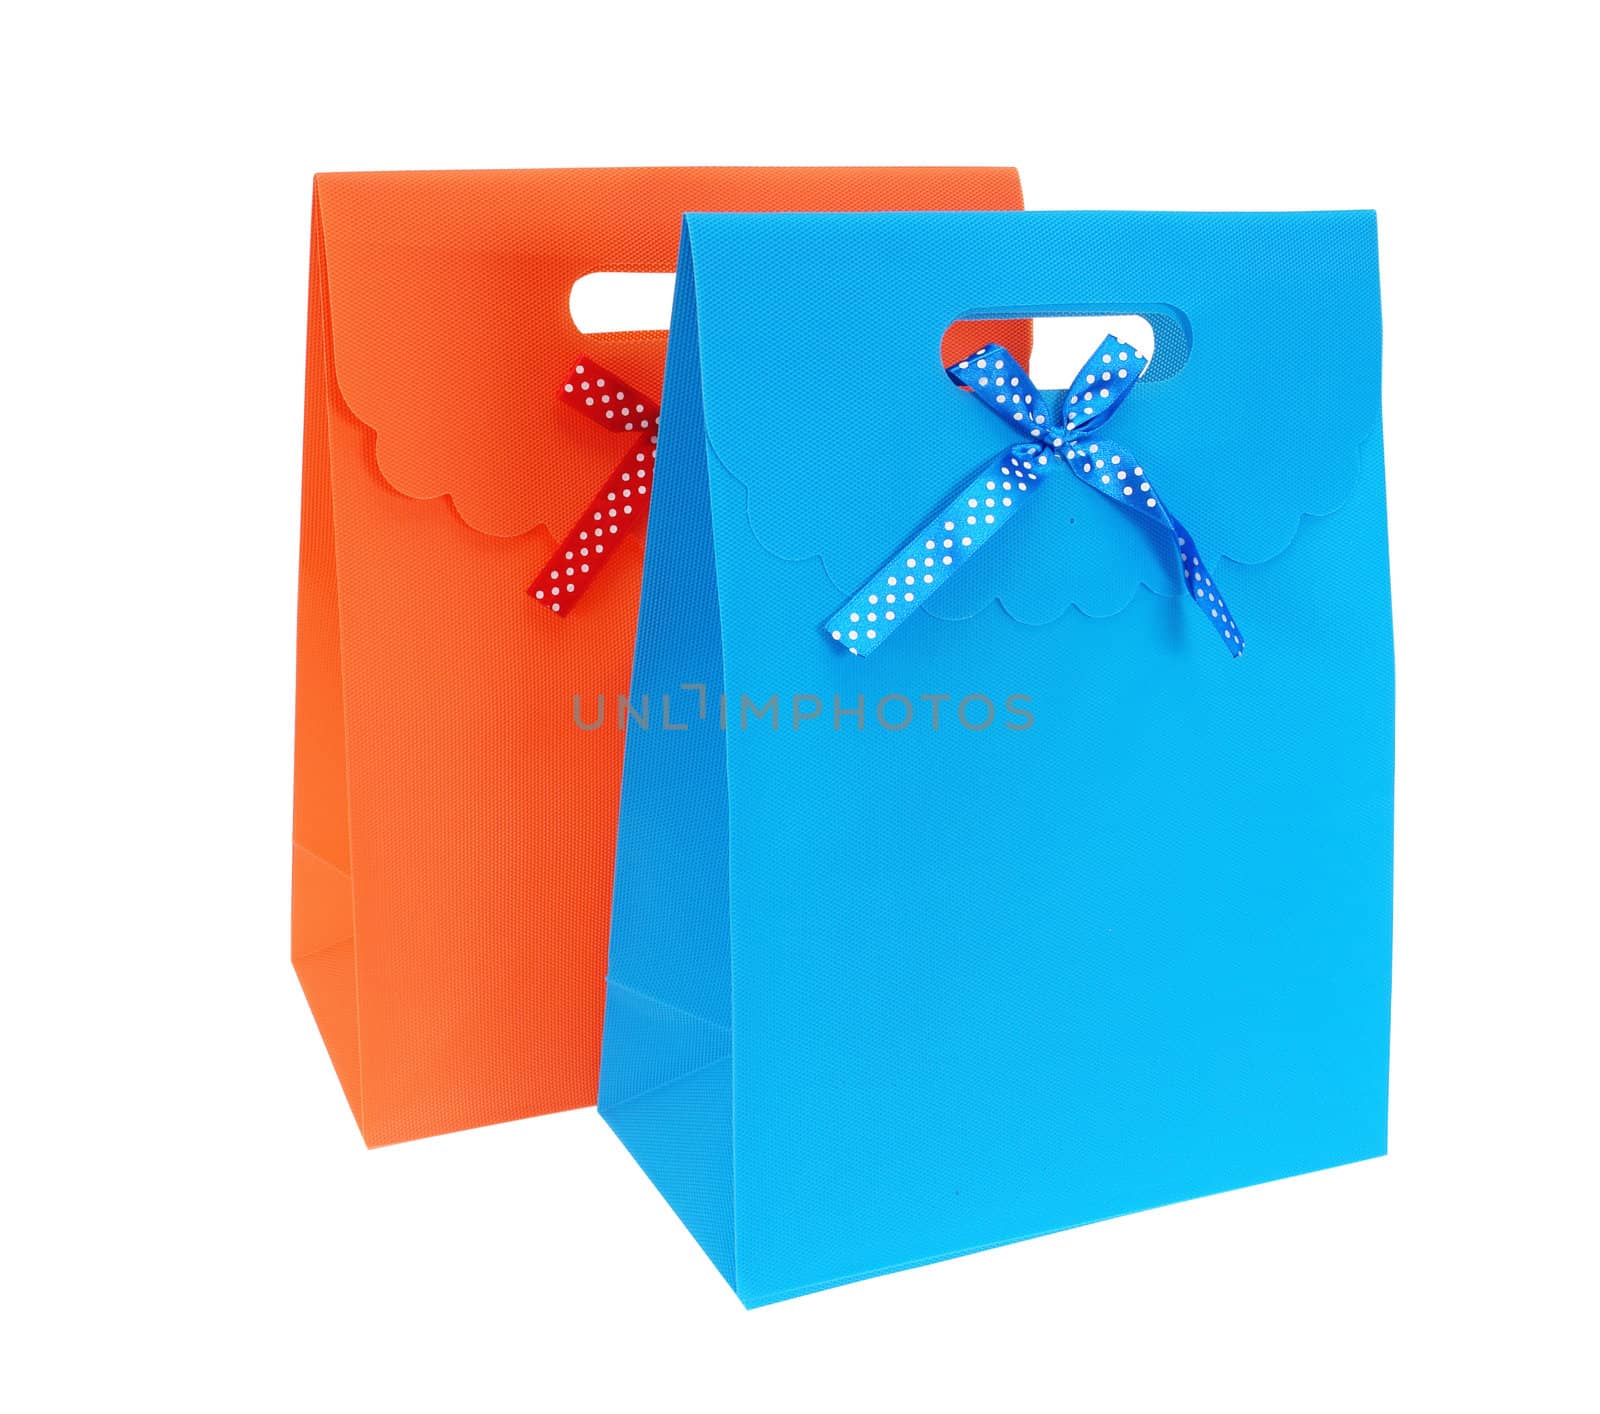 the orange and blue packages isolated on white background                                       